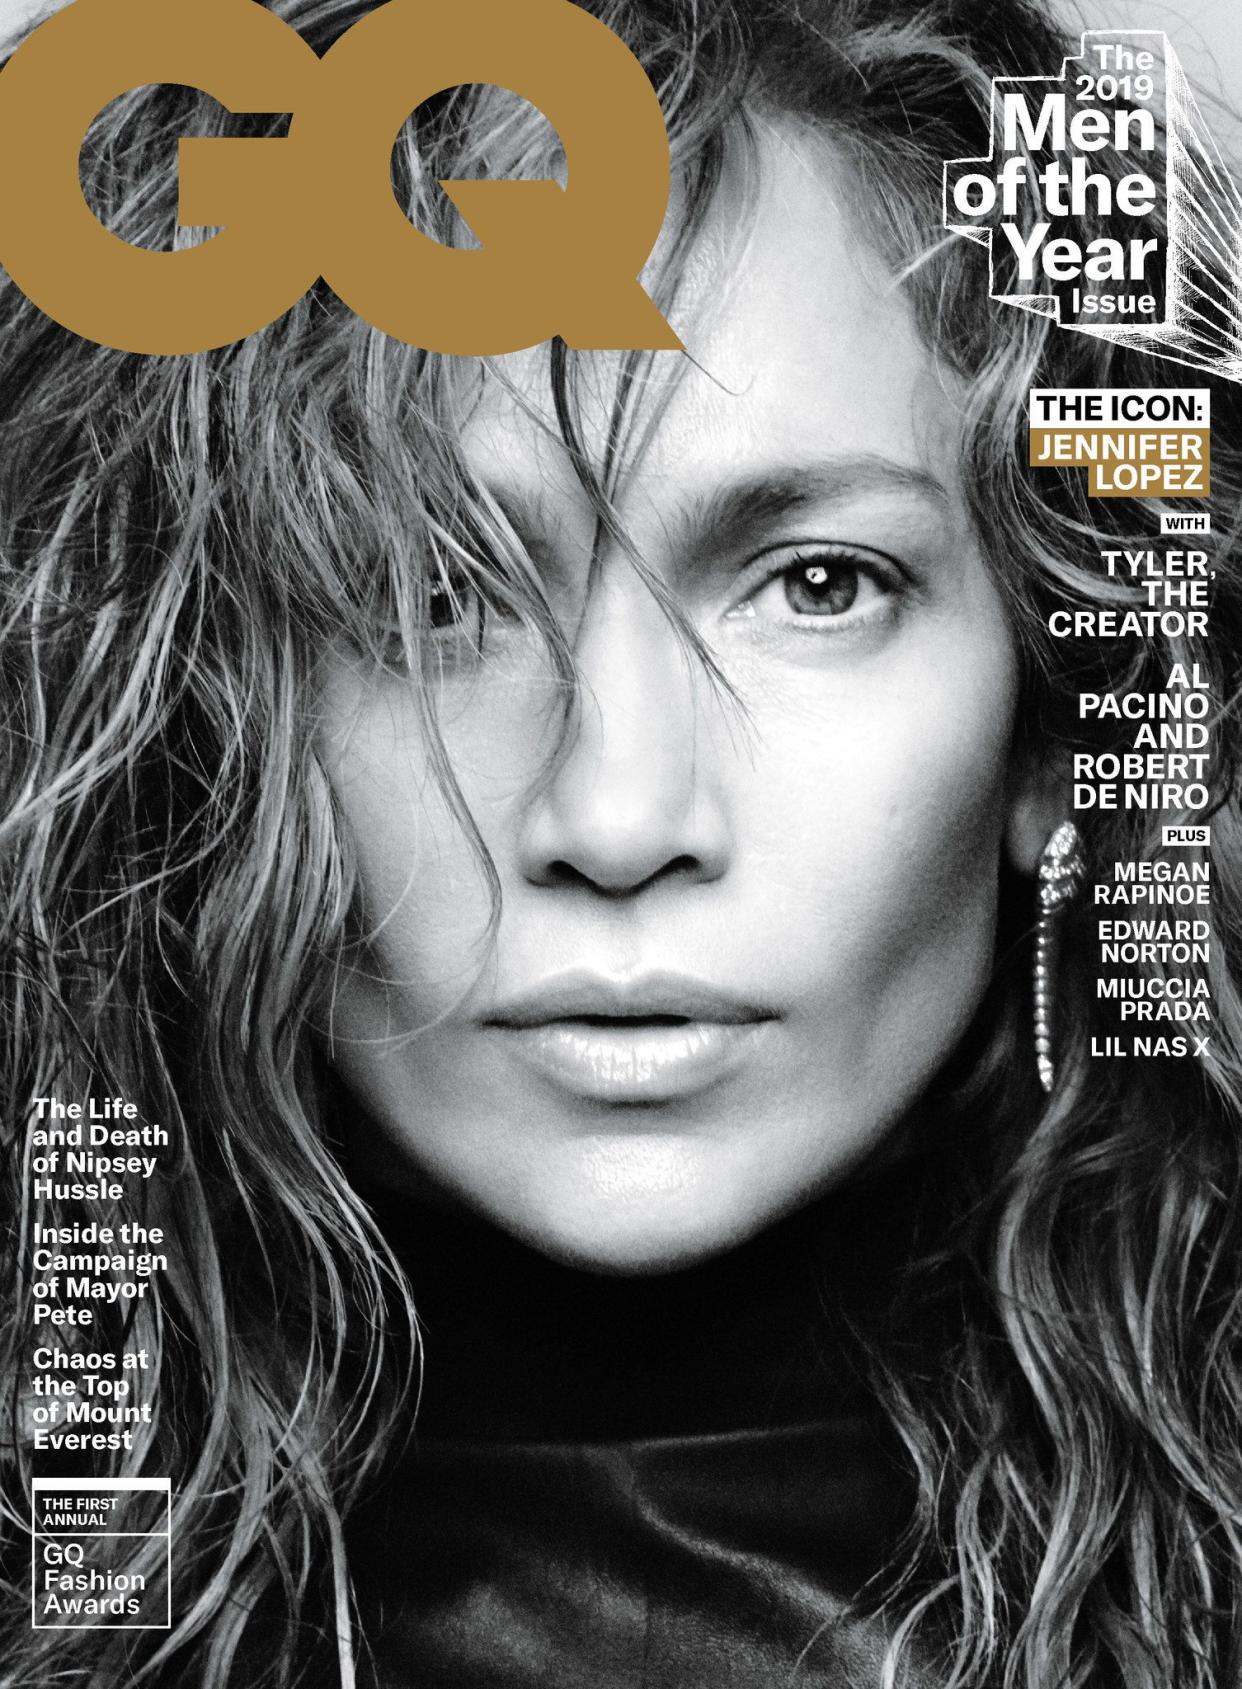 Jennifer Lopez poses for a steamy shoot as one of the four honorees for GQ magazine's 24th annual Men of the Year issue. Lopez, 50, had an outstanding year as "a movie icon, global pop icon and internet-melting fashion icon." Lopez talks about her fiance Alex Rodriguez, headlining the 2020 Super Bowl with Shakira and turning 50 earlier this year.